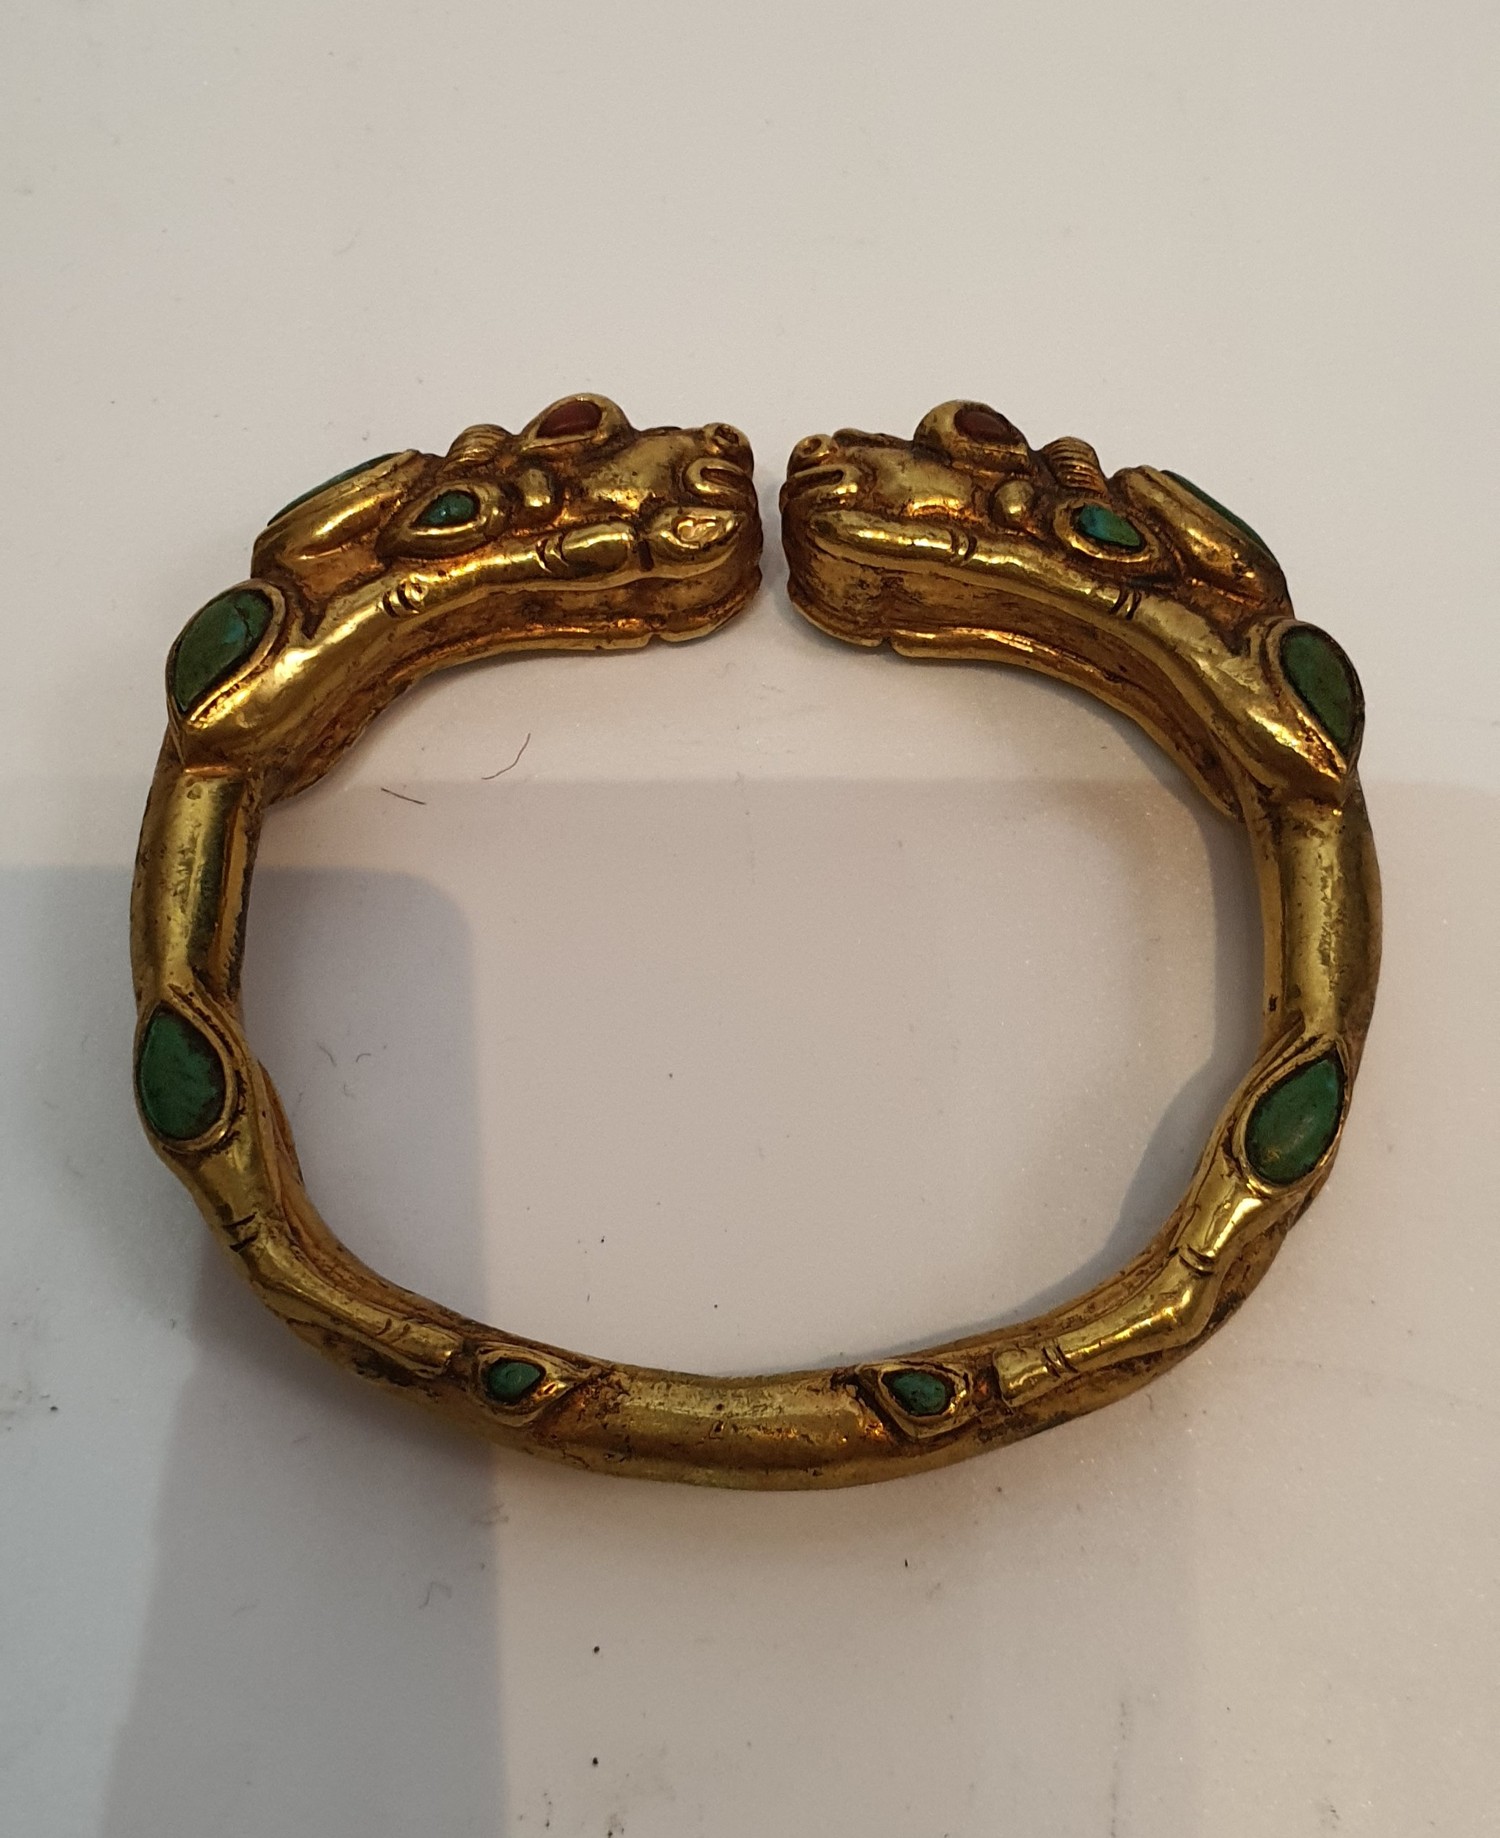 A Tibetan gilded bronze two headed dragon bangle inset with turquoise and red stone cabochons for - Image 2 of 4